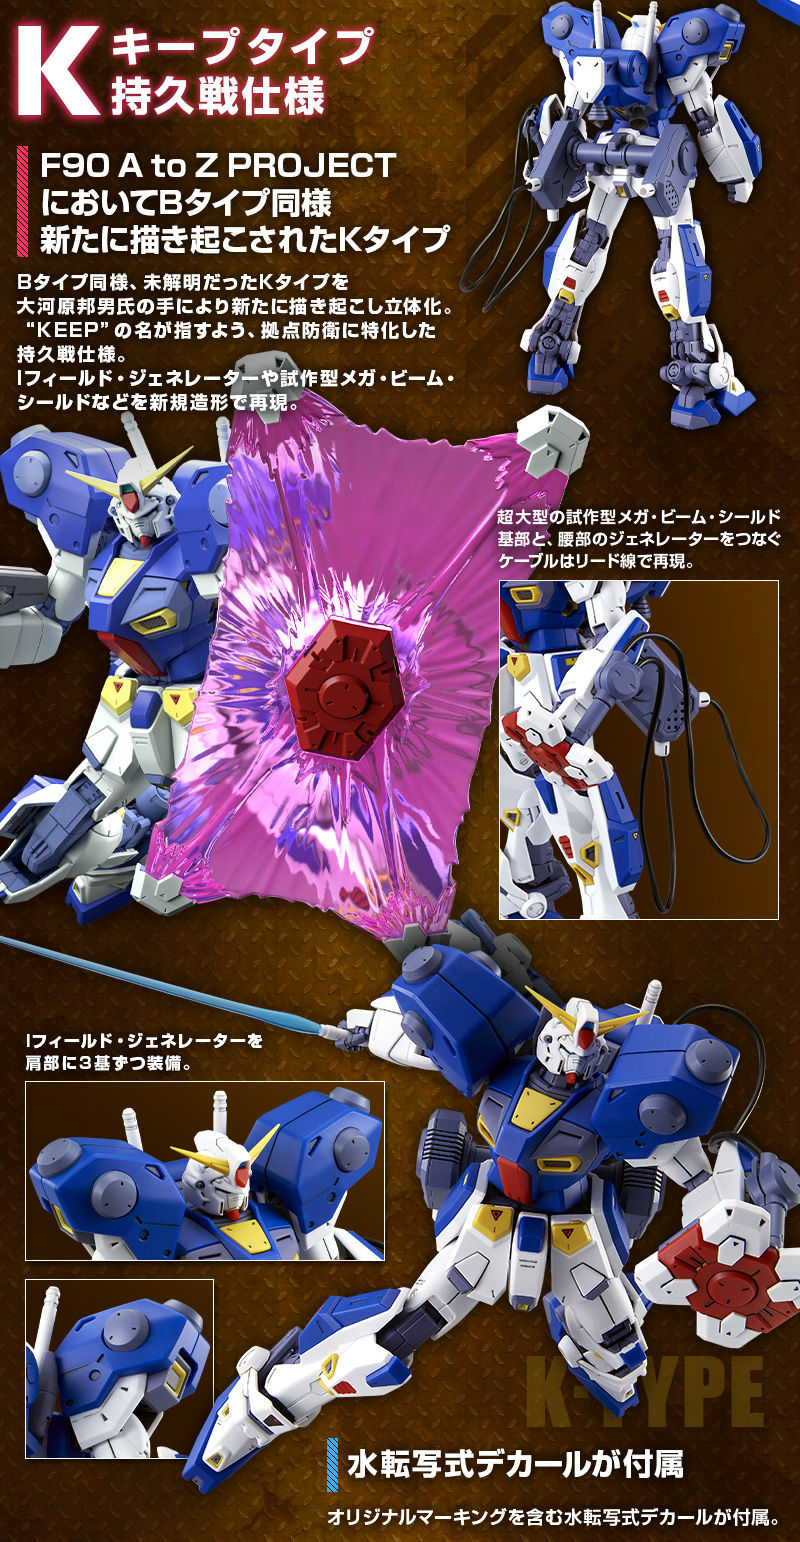 MG 1/100 Mission Pack B-Type & K-Type Expansion Parts For Formula 90 Gundam F90